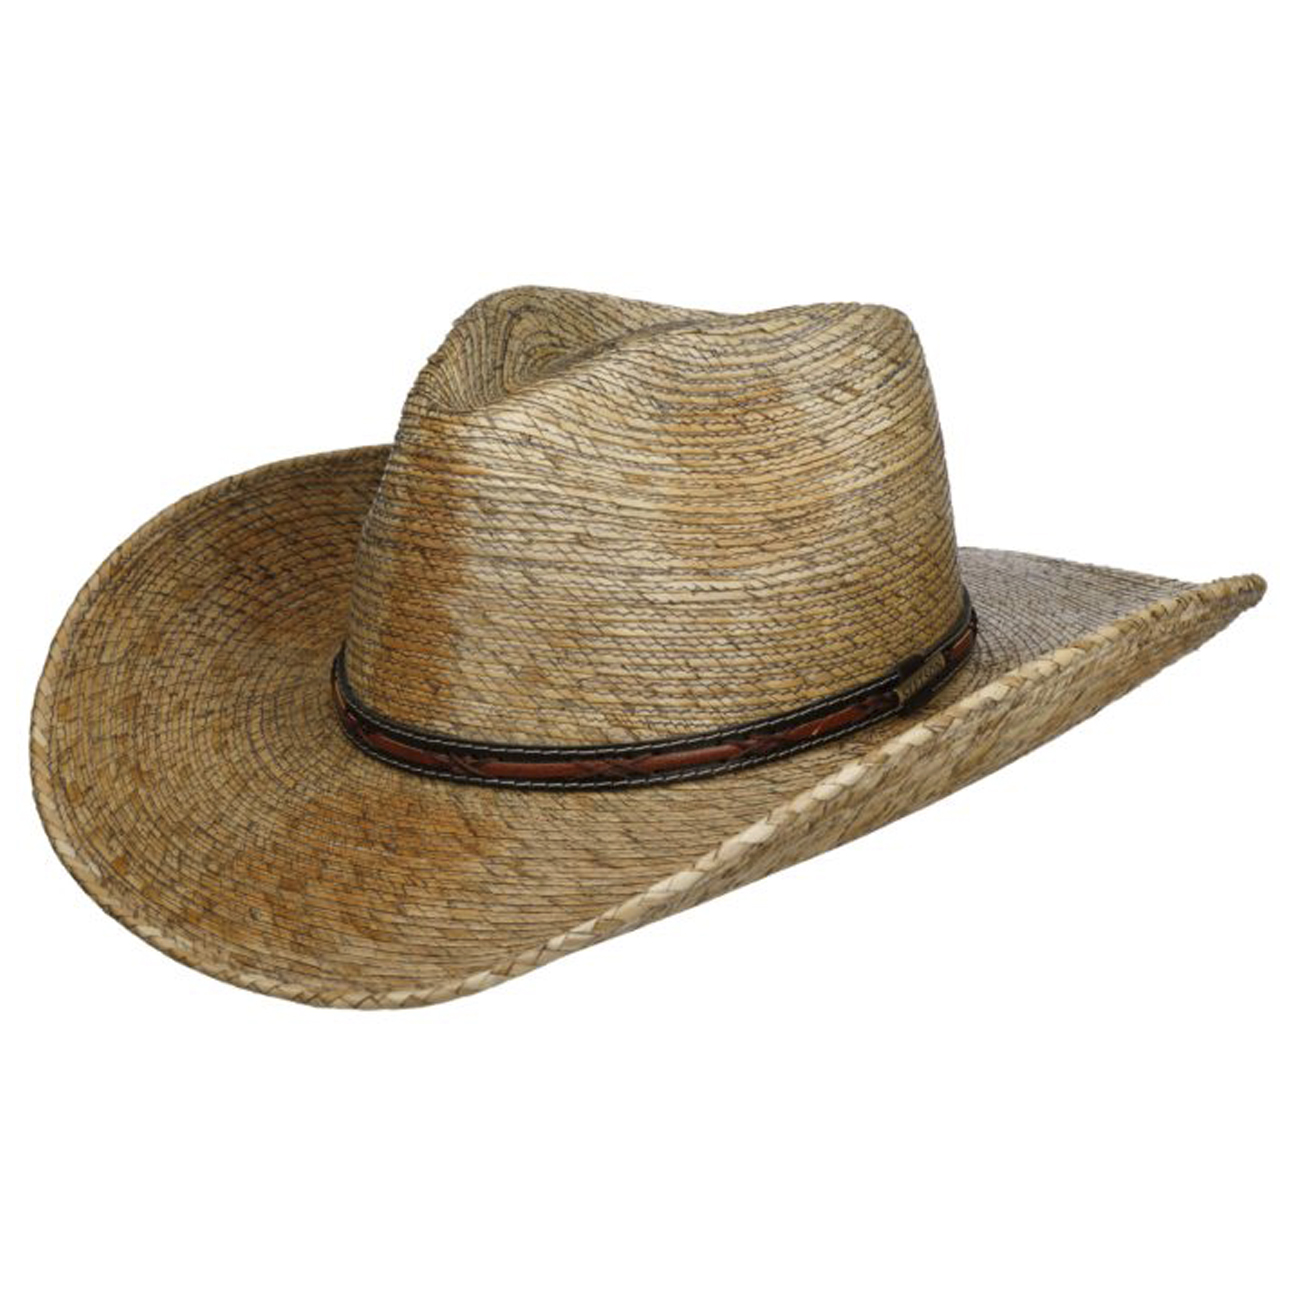 Stetson - Mexican Western Straw Cowboy Hat - Nature